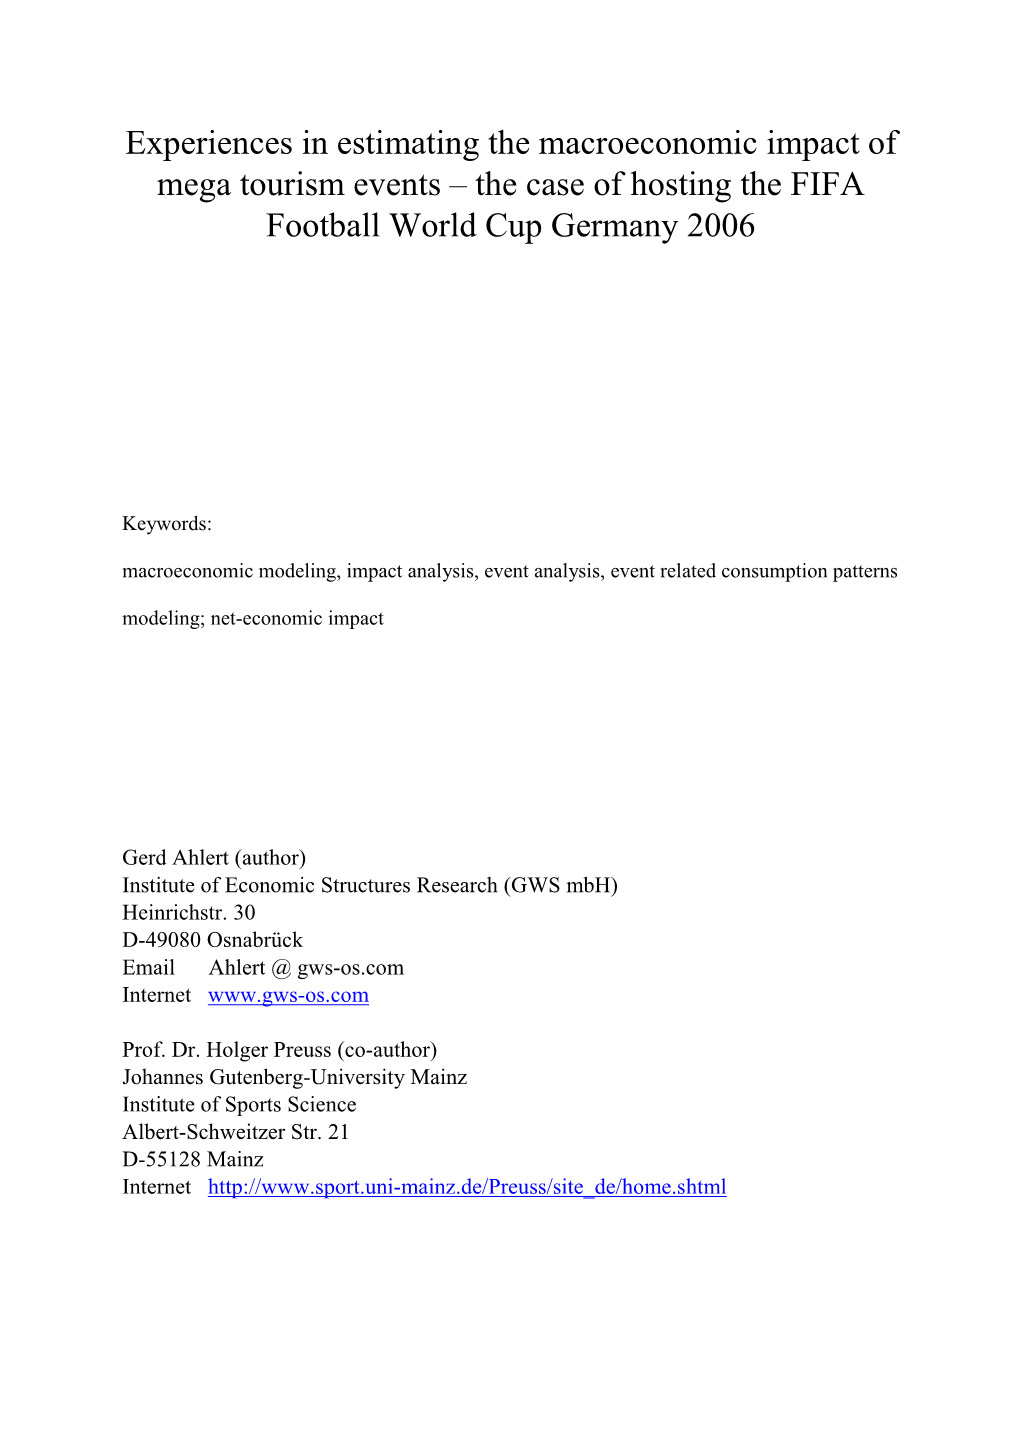 The Case of Hosting the FIFA Football World Cup Germany 2006